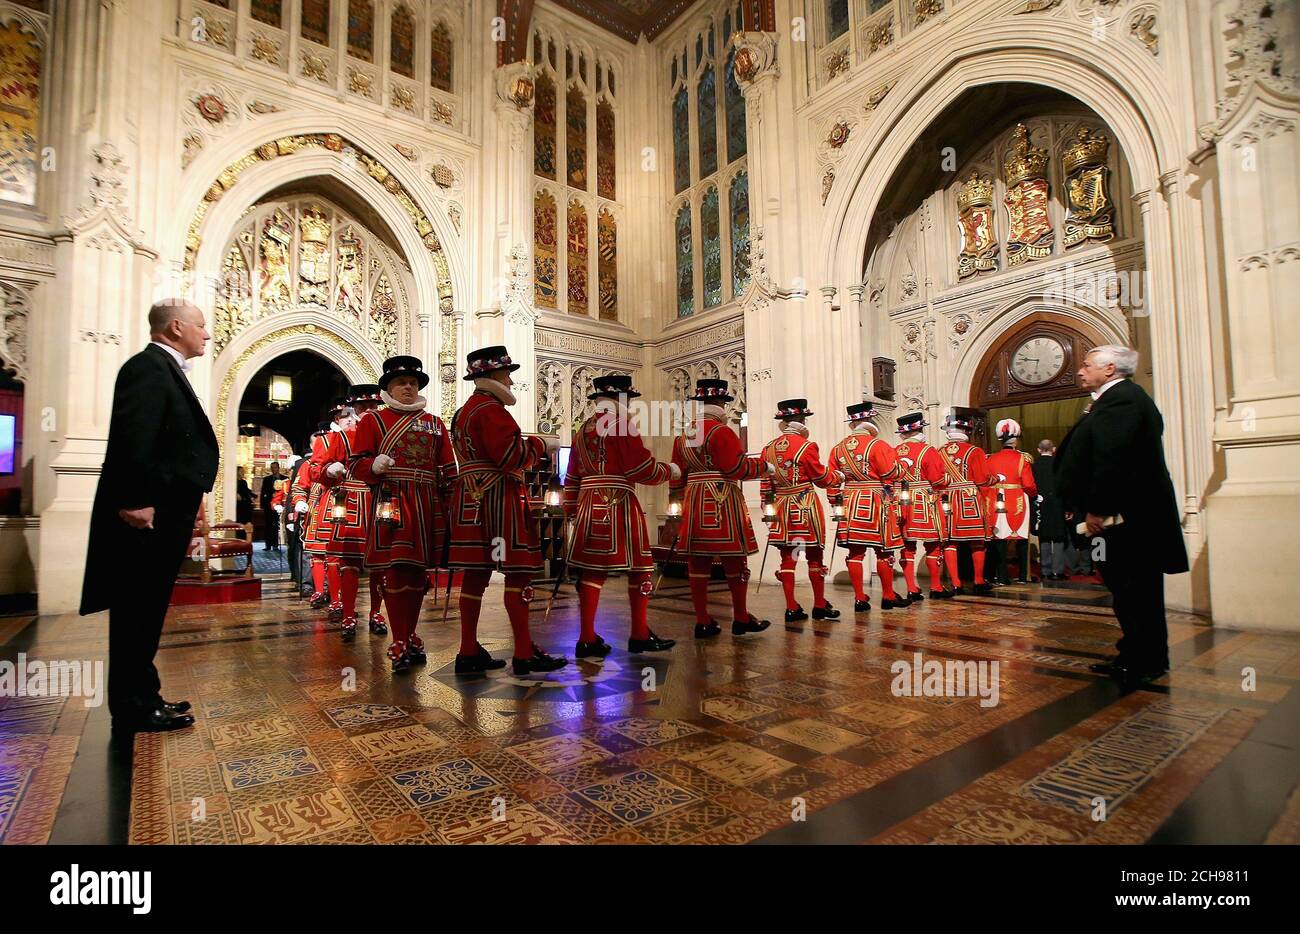 The Yeoman of the Guard walk through the Peer's Lobby after carrying out the Ceremonial Search, ahead of the State Opening of Parliament, in the House of Lords at the Palace of Westminster in London. Stock Photo